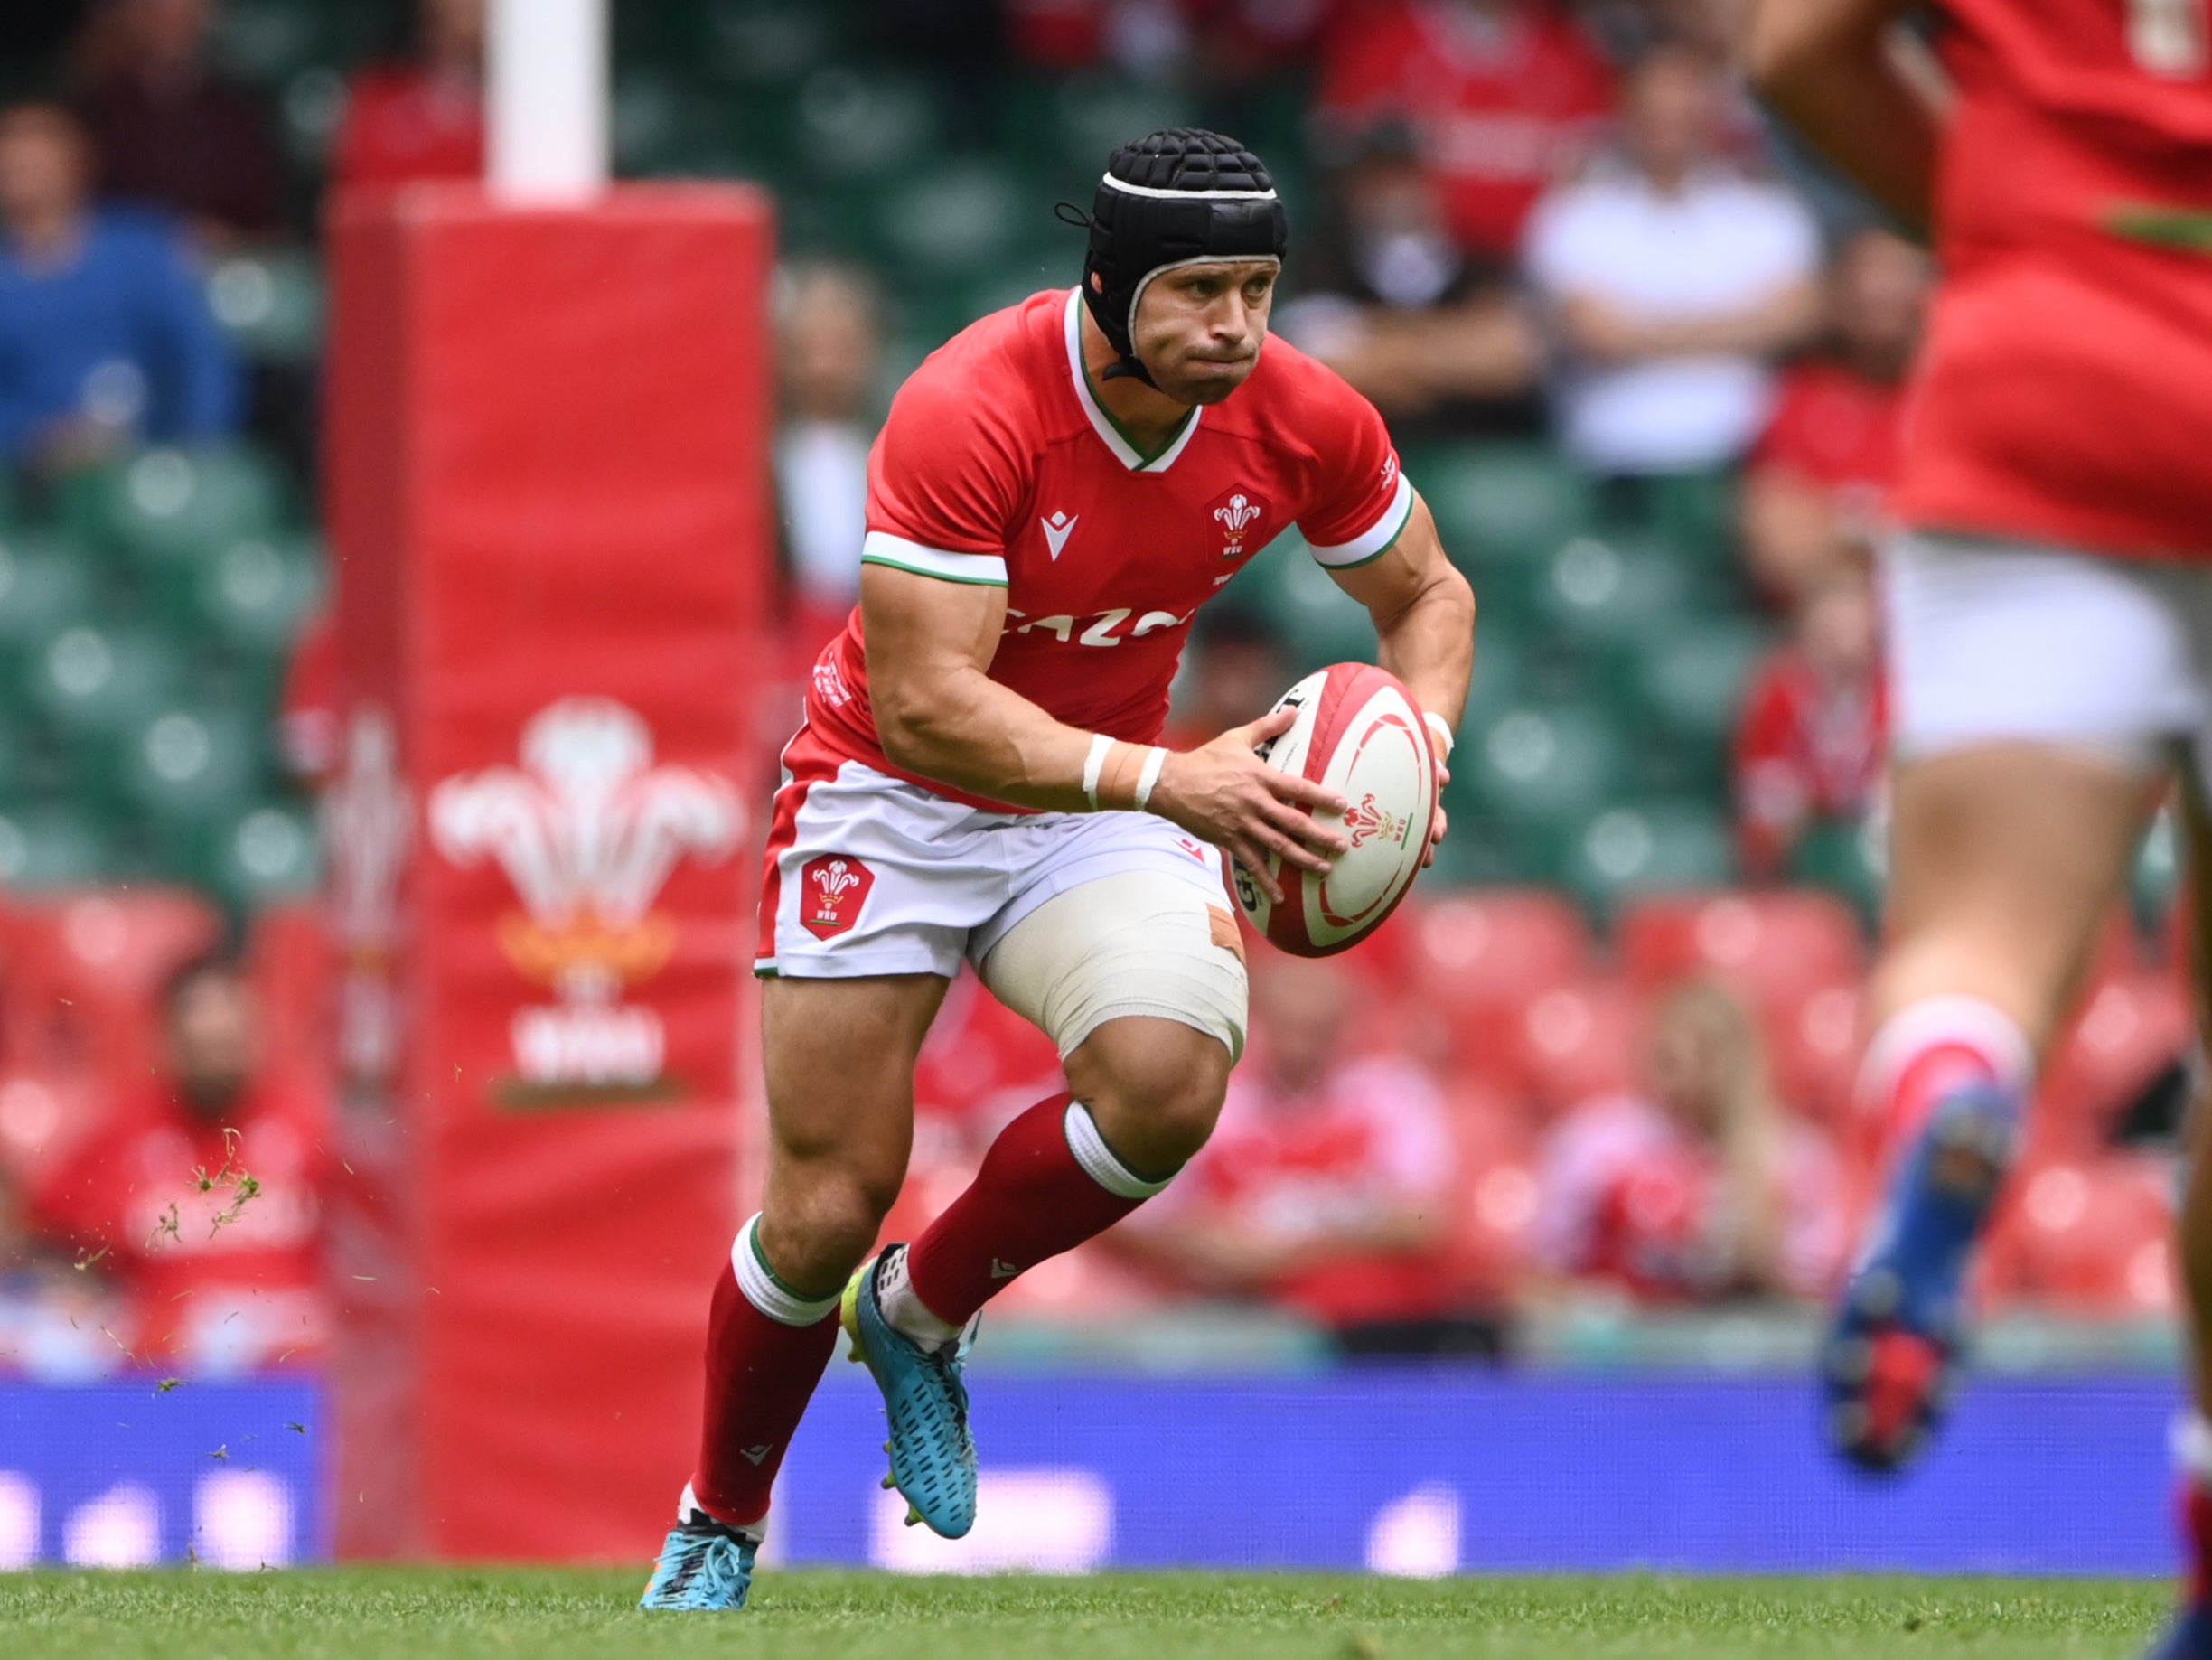 The Scarlets full-back was set to start Saturday’s game